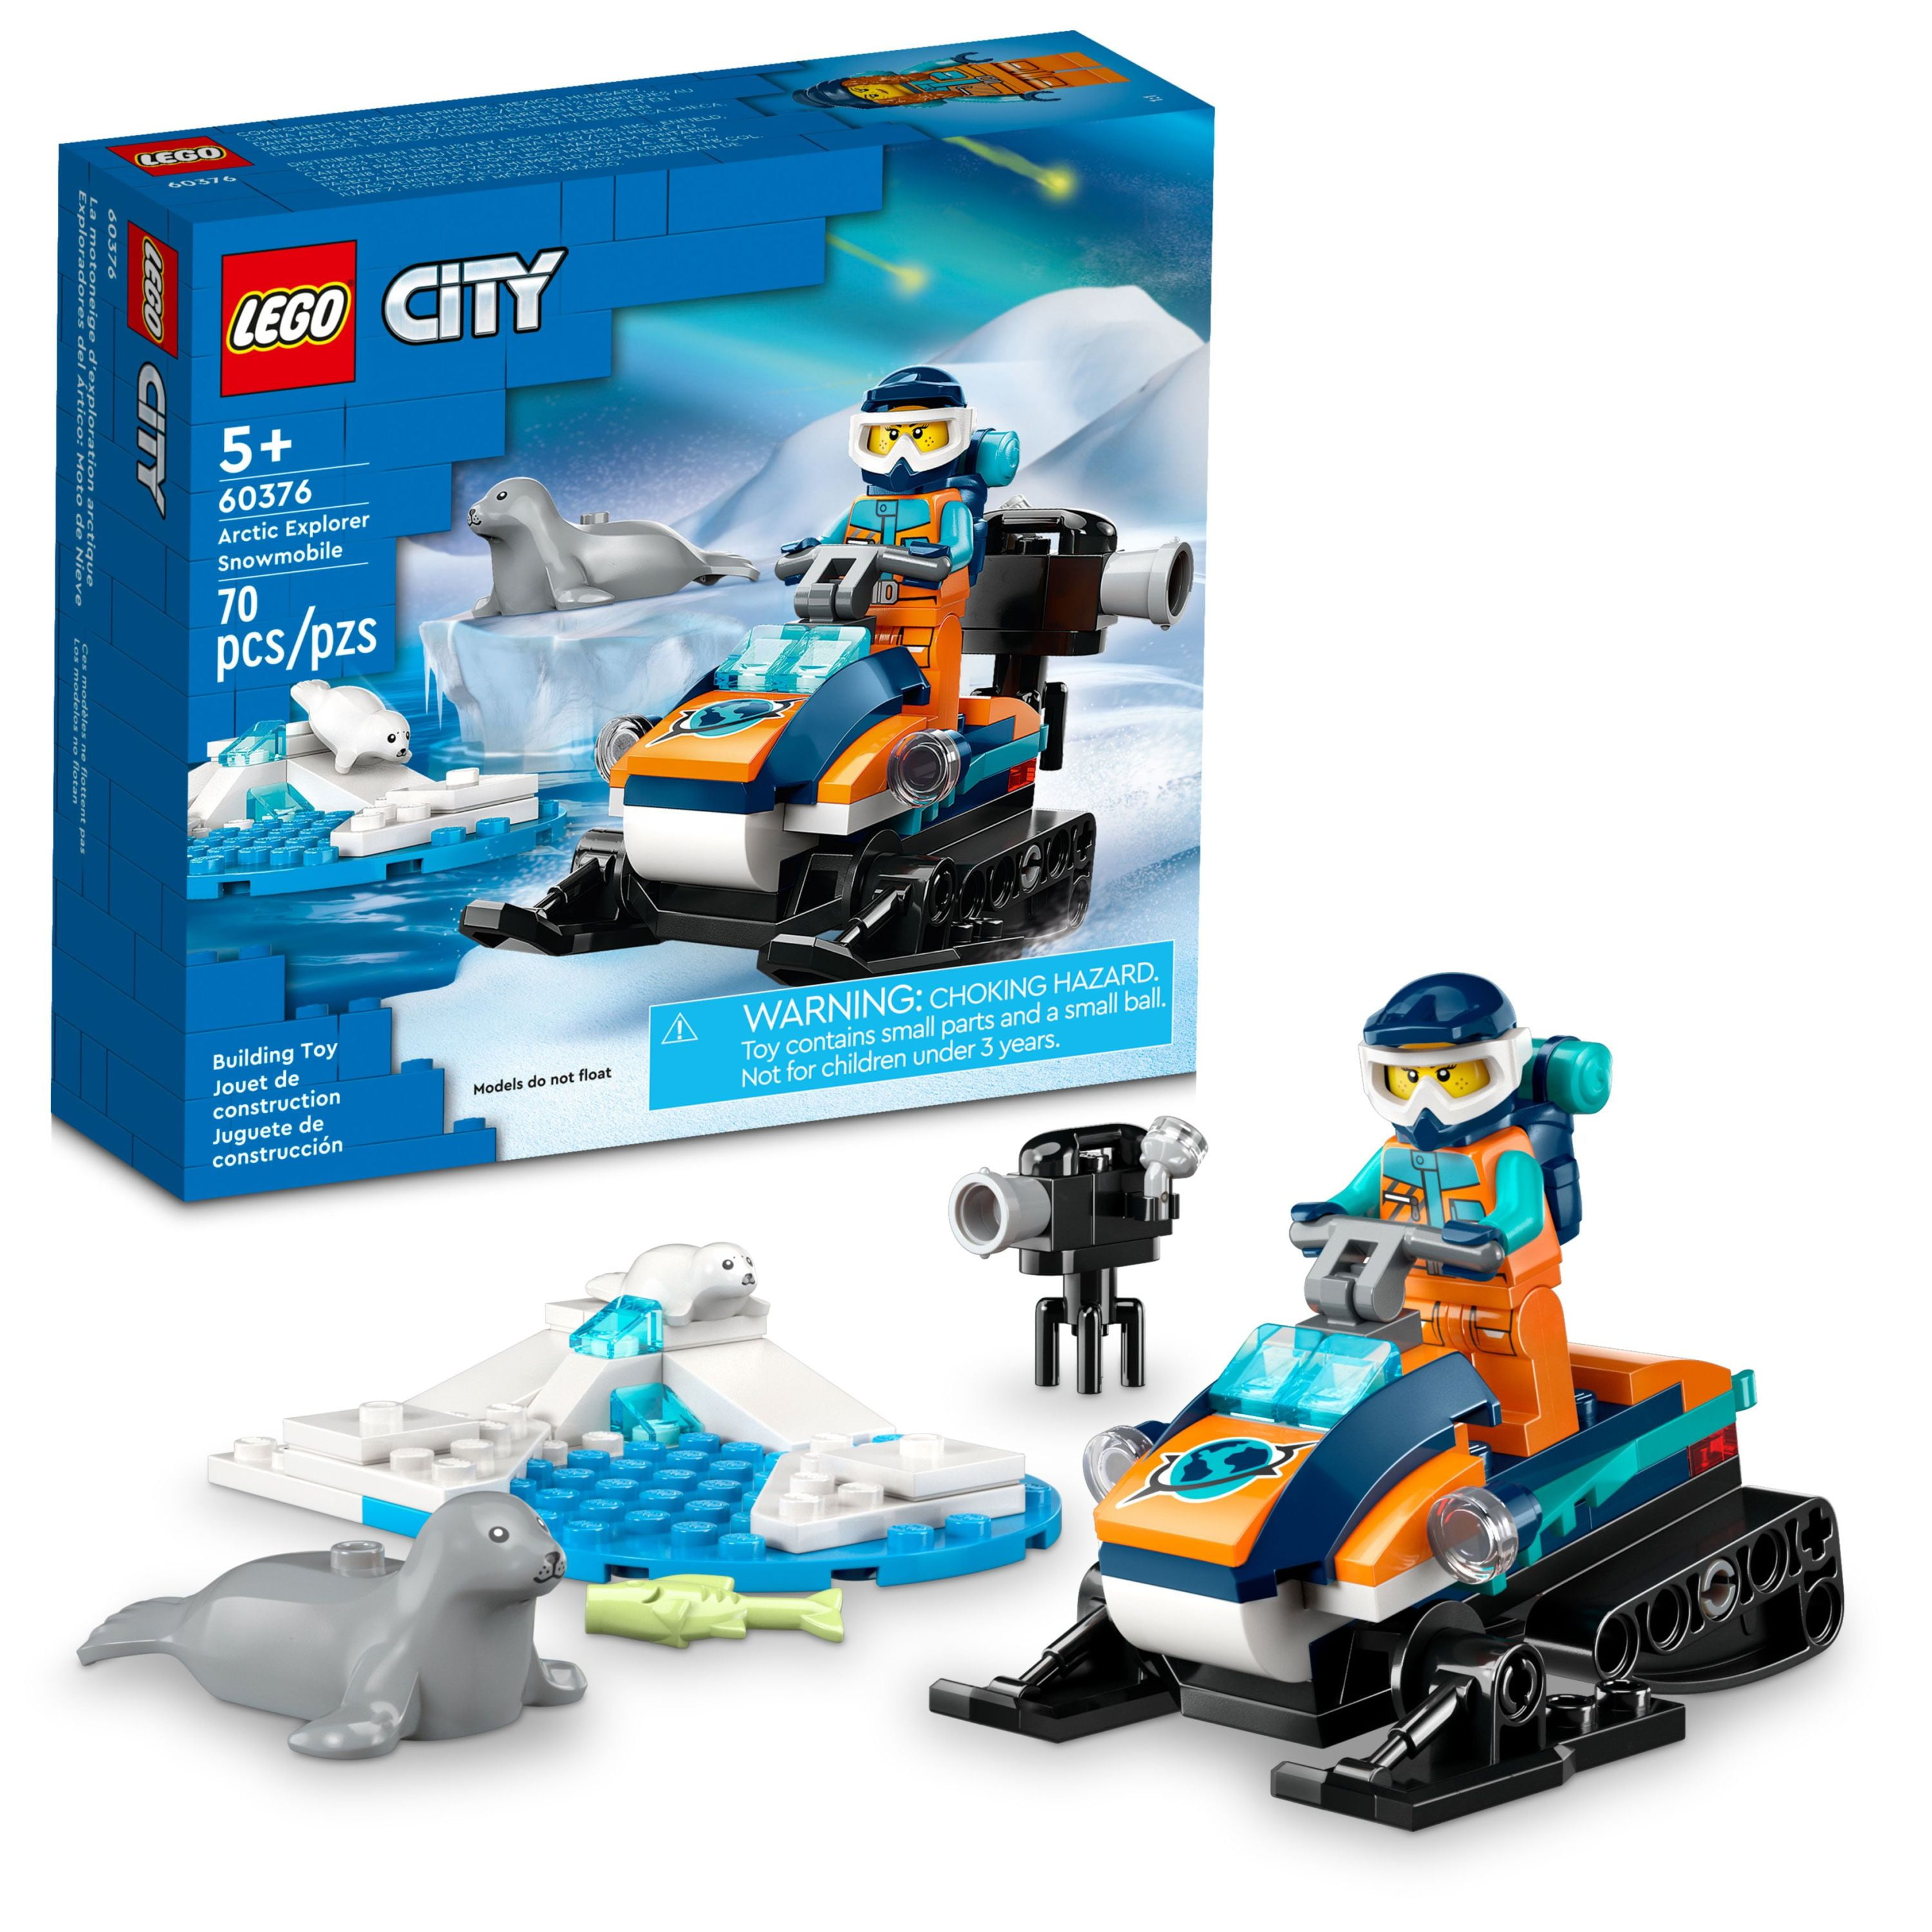 LEGO City Arctic Explorer Snowmobile 60376 Building Toy Set, Snowmobile  Playset with Minifigures and 2 Seal Figures for Imaginative Role Play, Fun